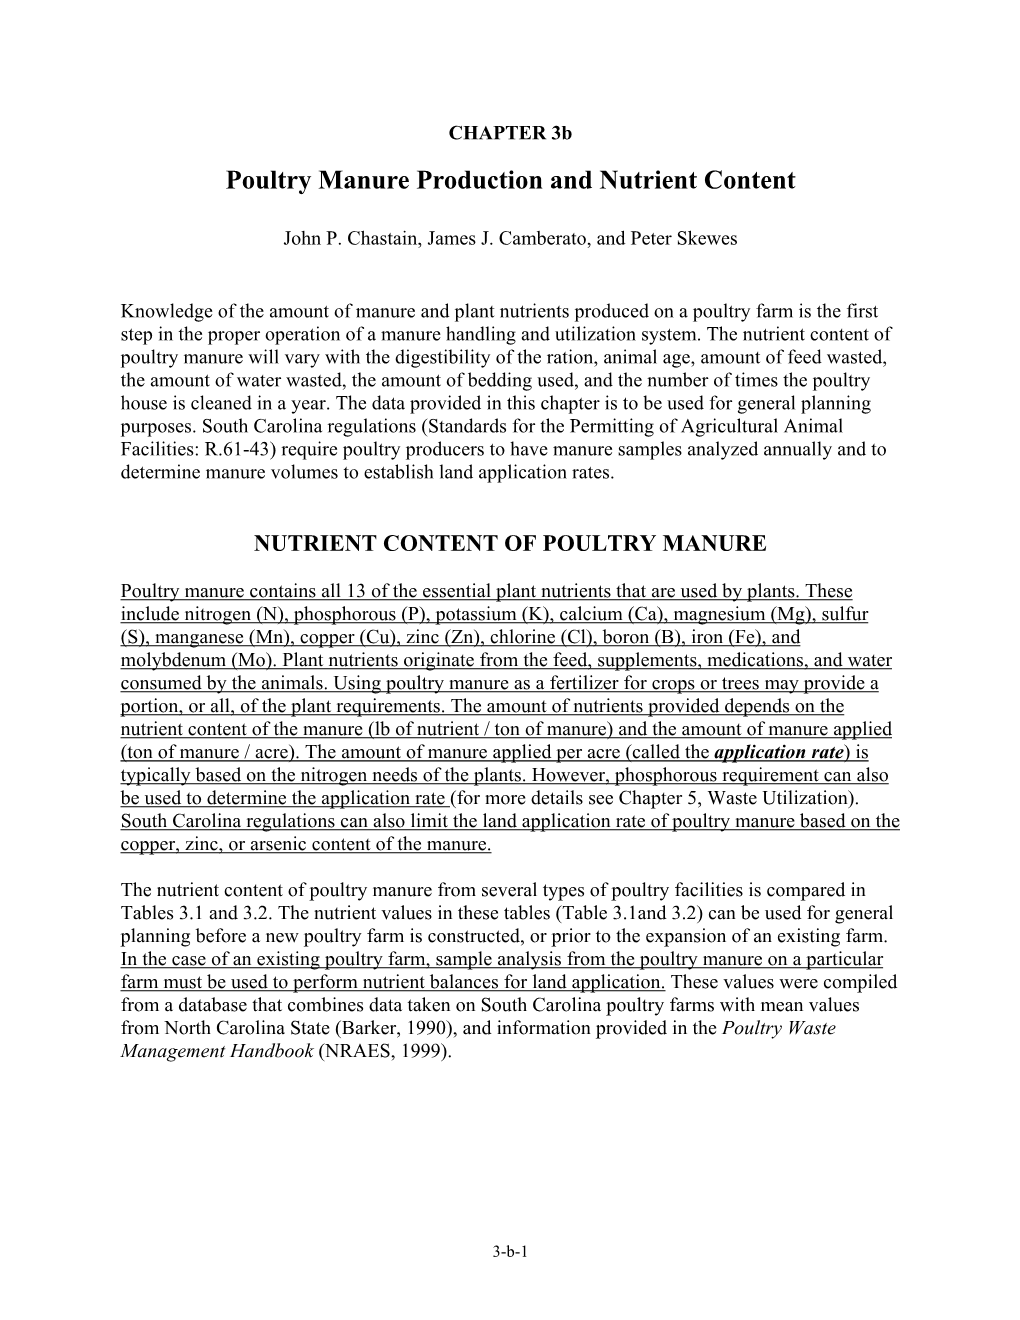 Poultry Manure Production and Nutrient Content